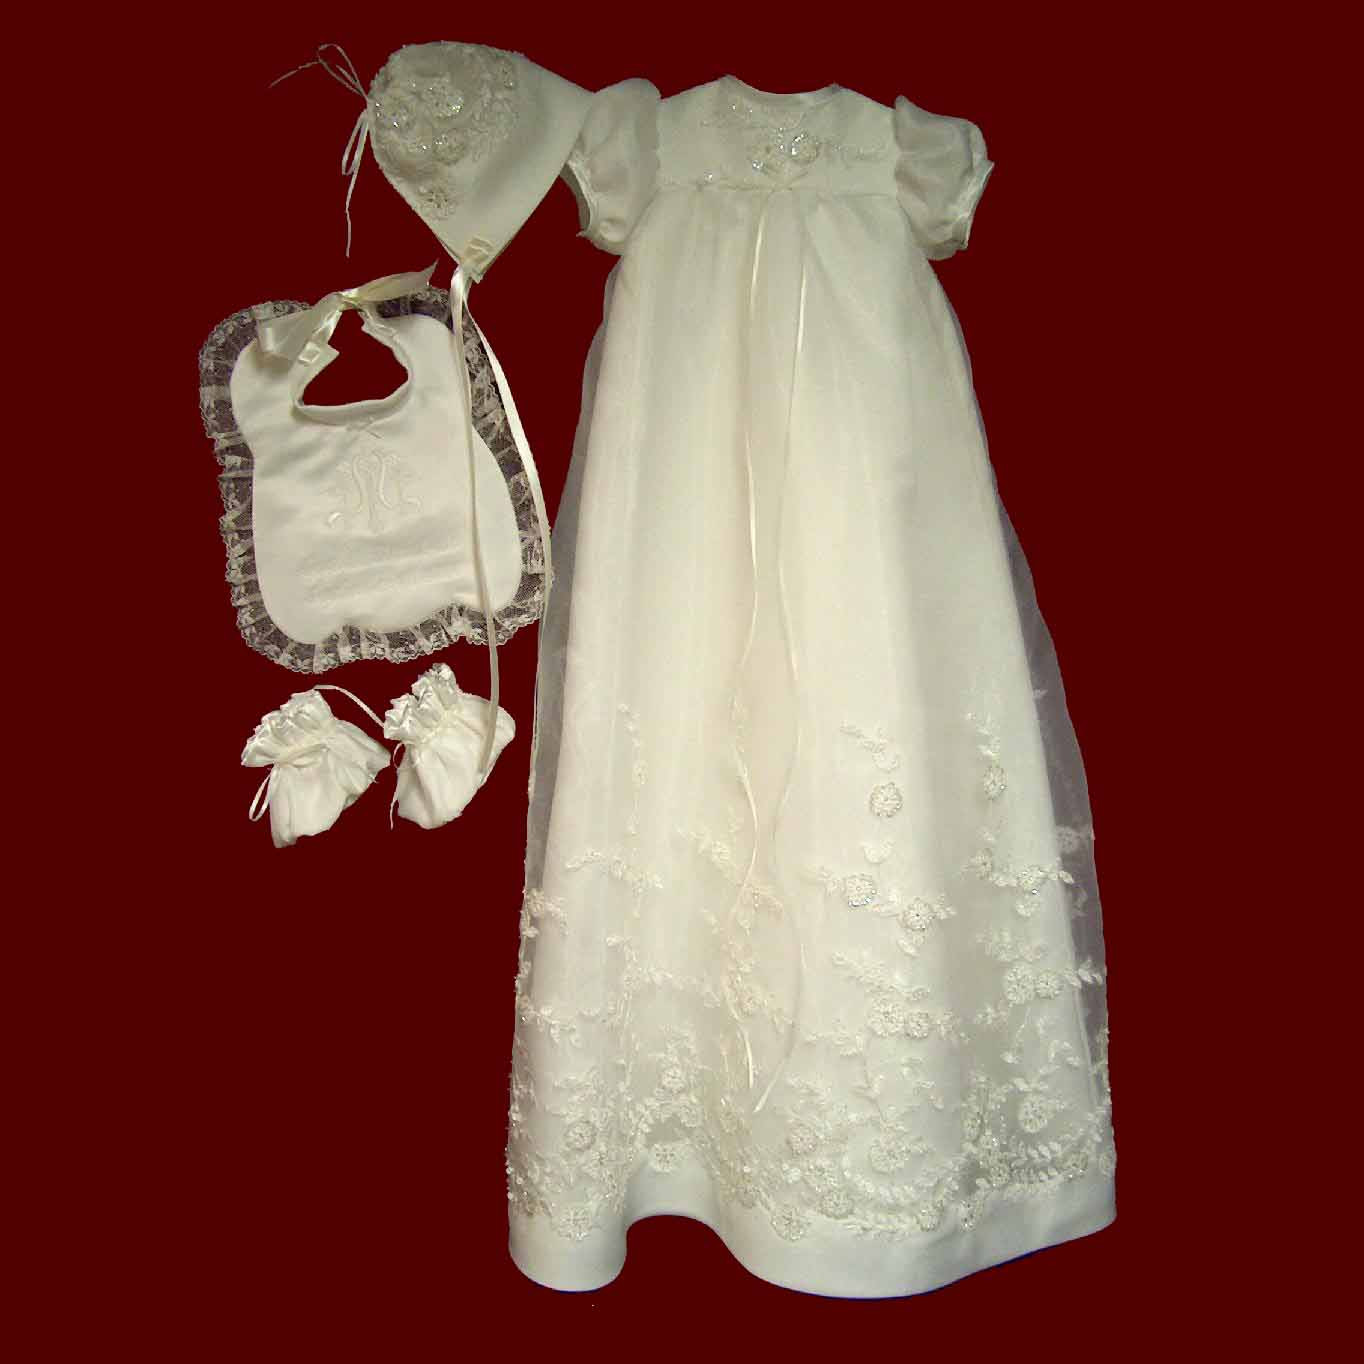 Christening Gown From Wedding Dress
 Christening Gown Made From Your Wedding Dress Girls